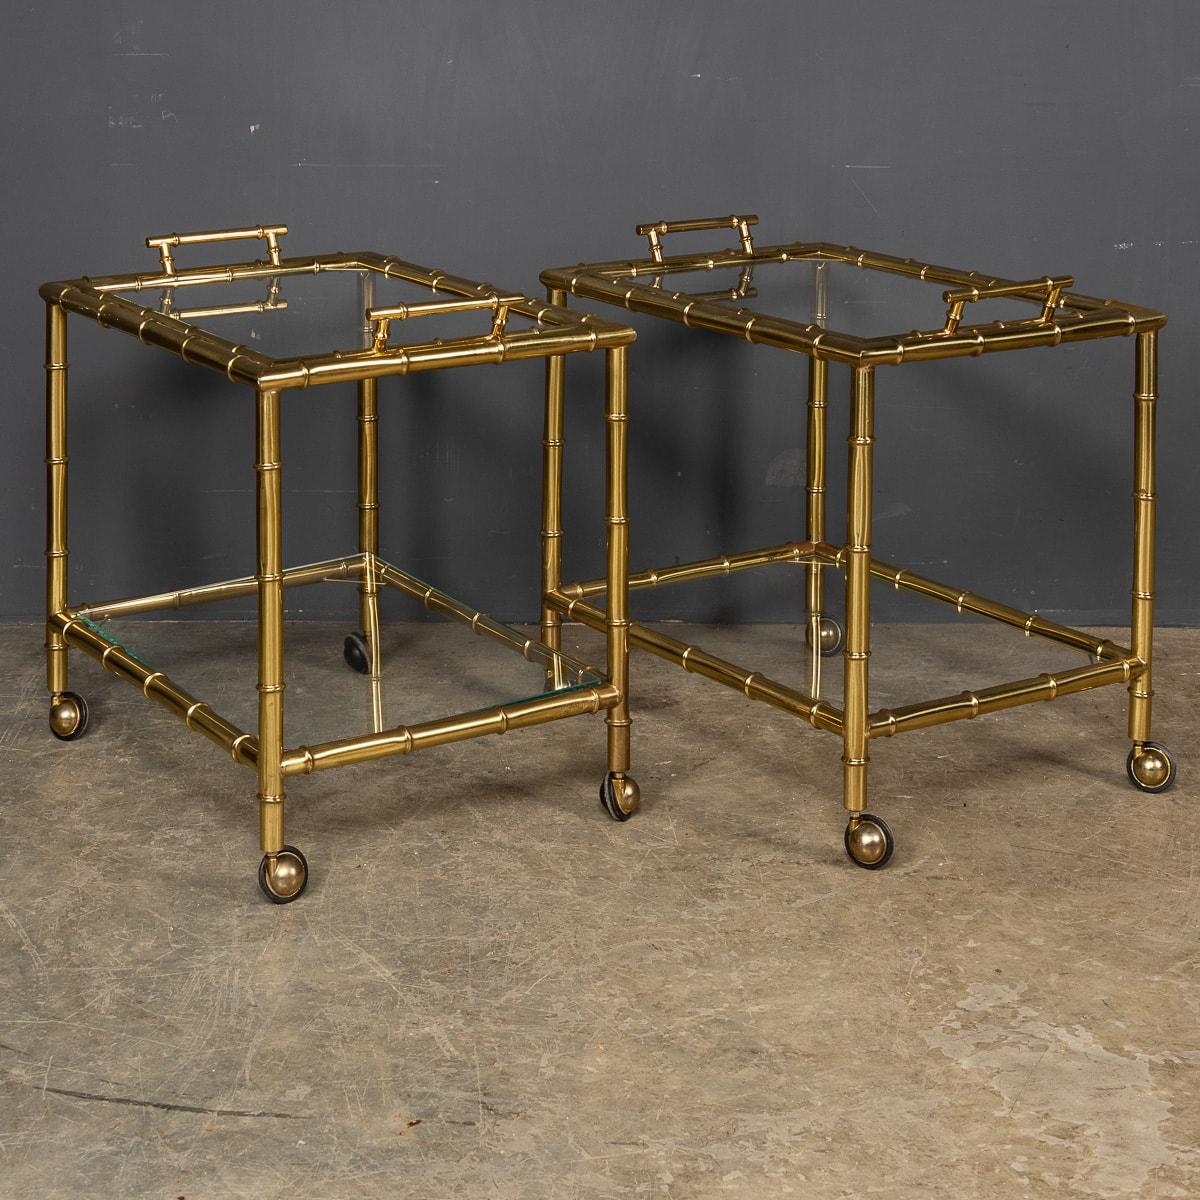 Stylish mid 20th century French brass faux bamboo two-tier trolleys, this fine pair of trolleys have their original castors and removable trays with twin handles, made possibly Maison Jansen. A must have for any sophisticated cocktail or dinner